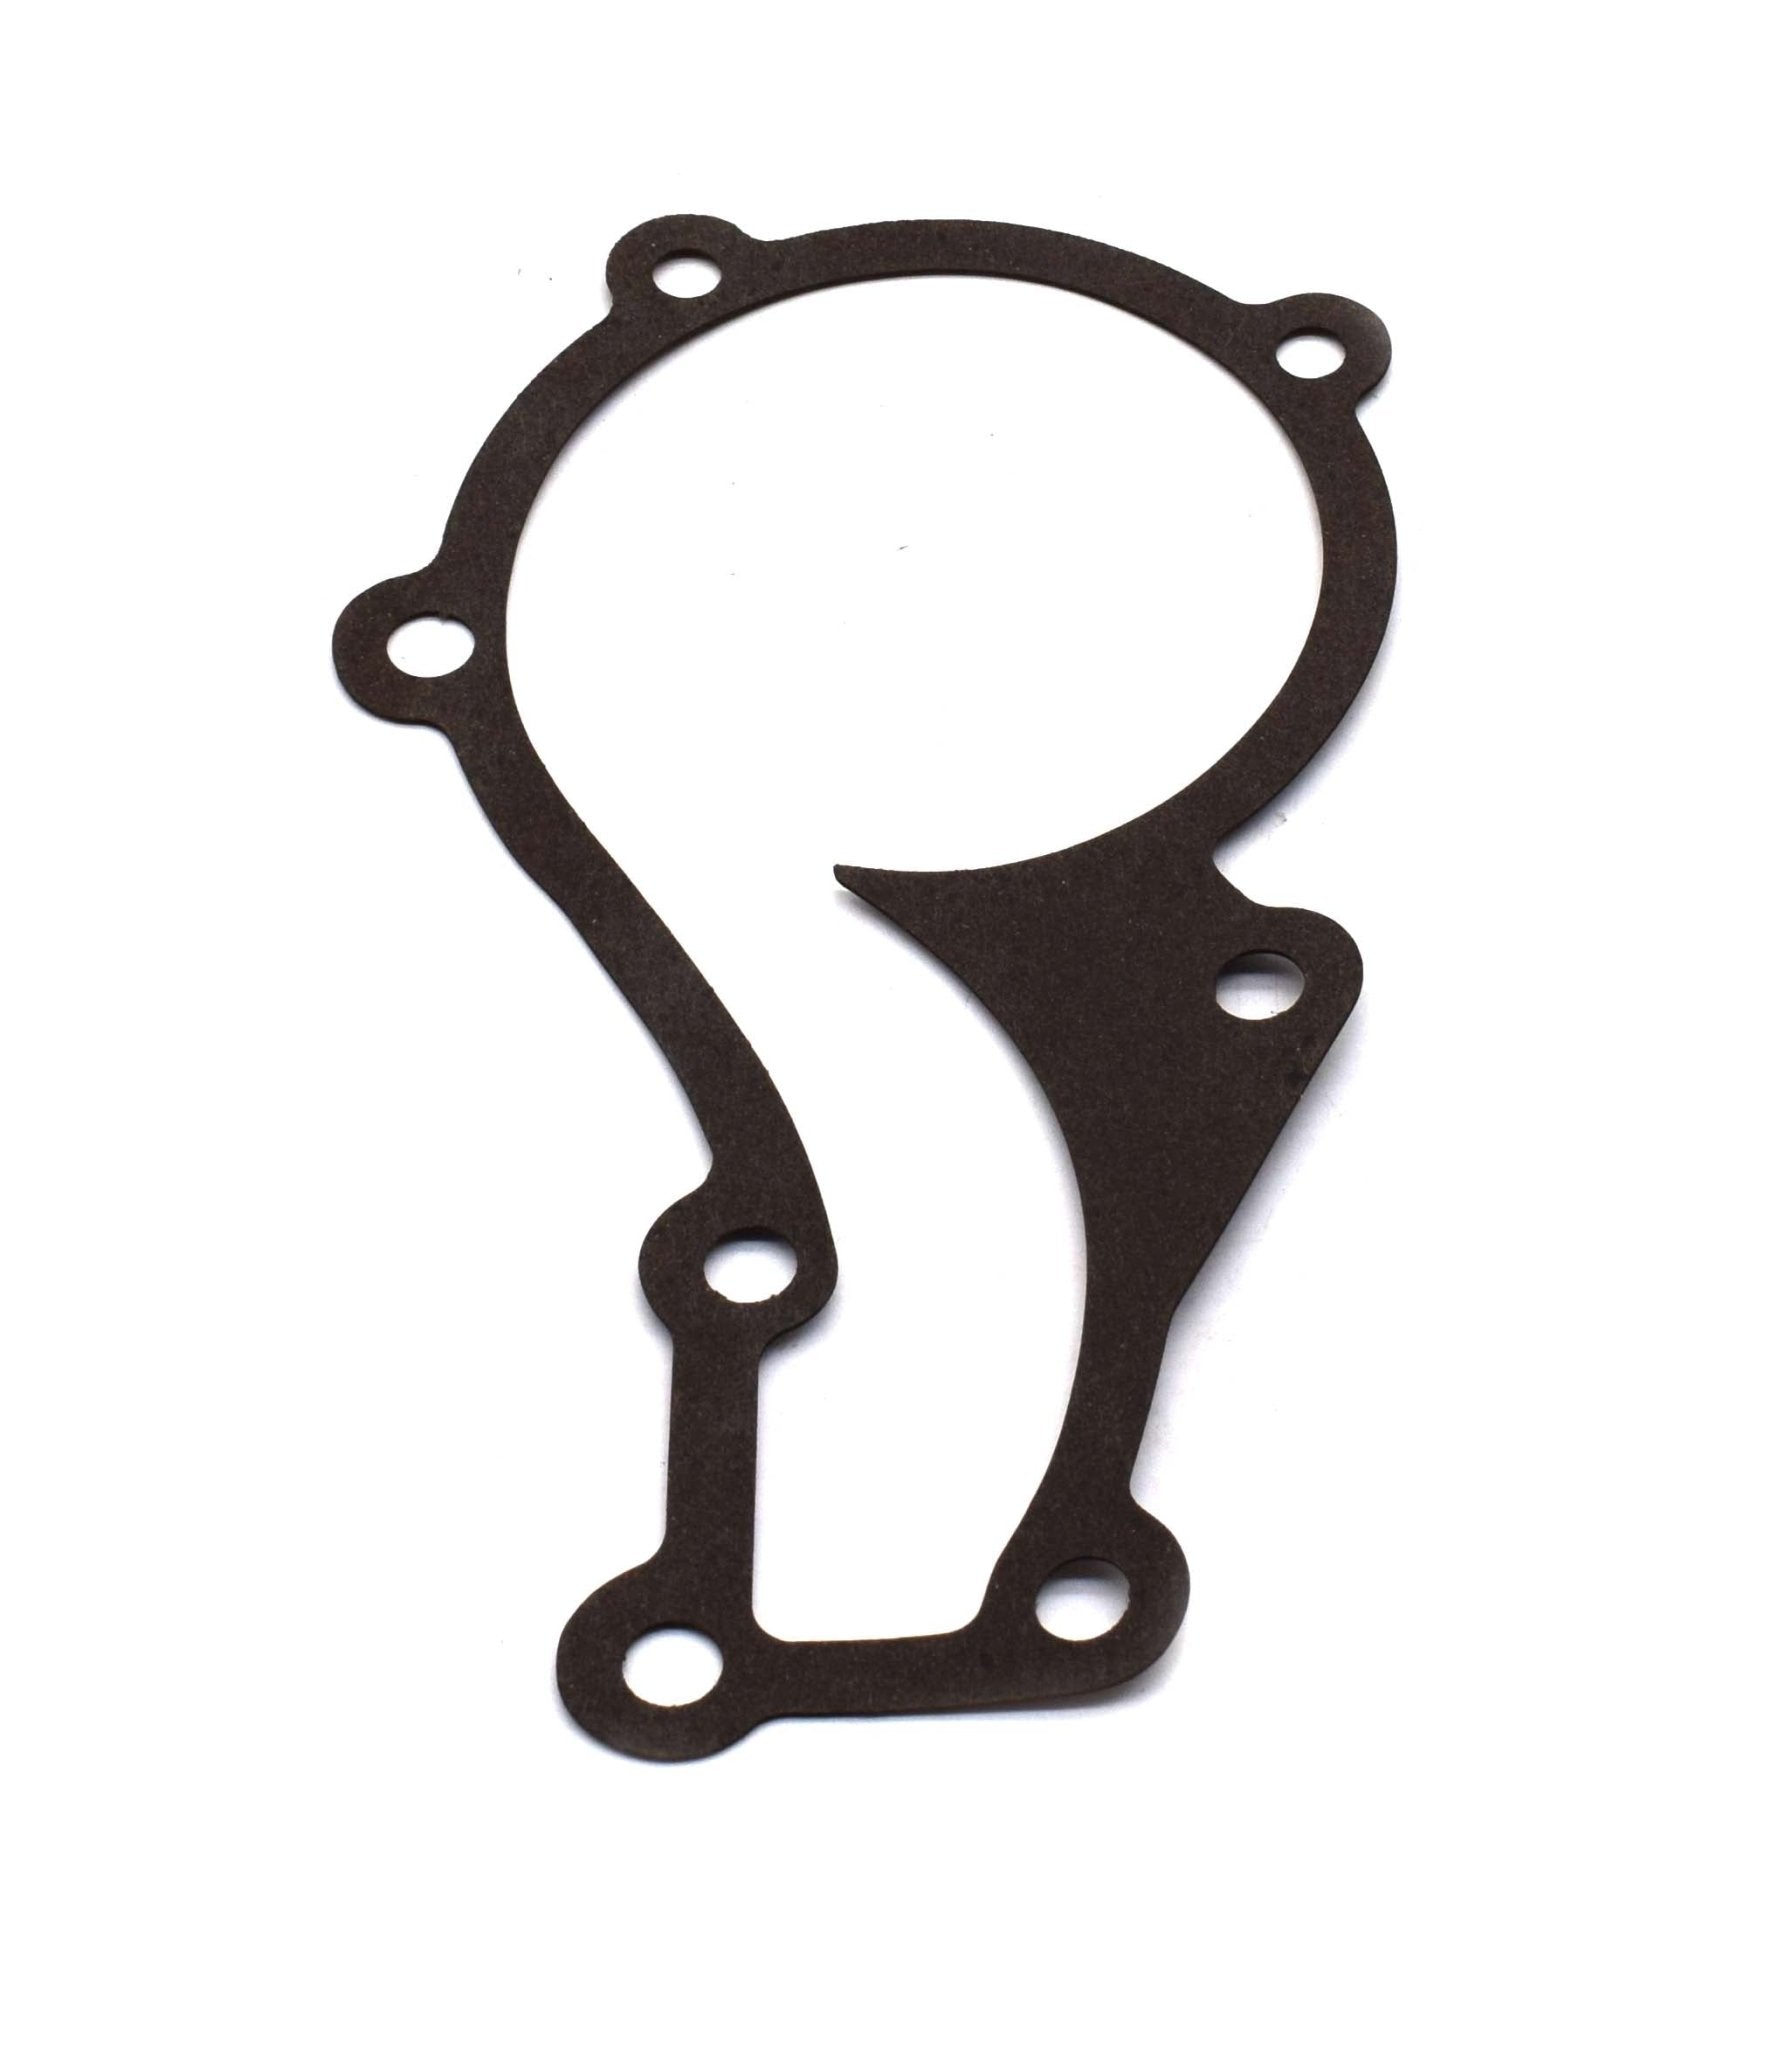 Water Pump Gasket, 230 Tornado, 1962-1965, Willys Station Wagon, Pickup Truck, Jeep Wagoneer, and Gladiator - The JeepsterMan